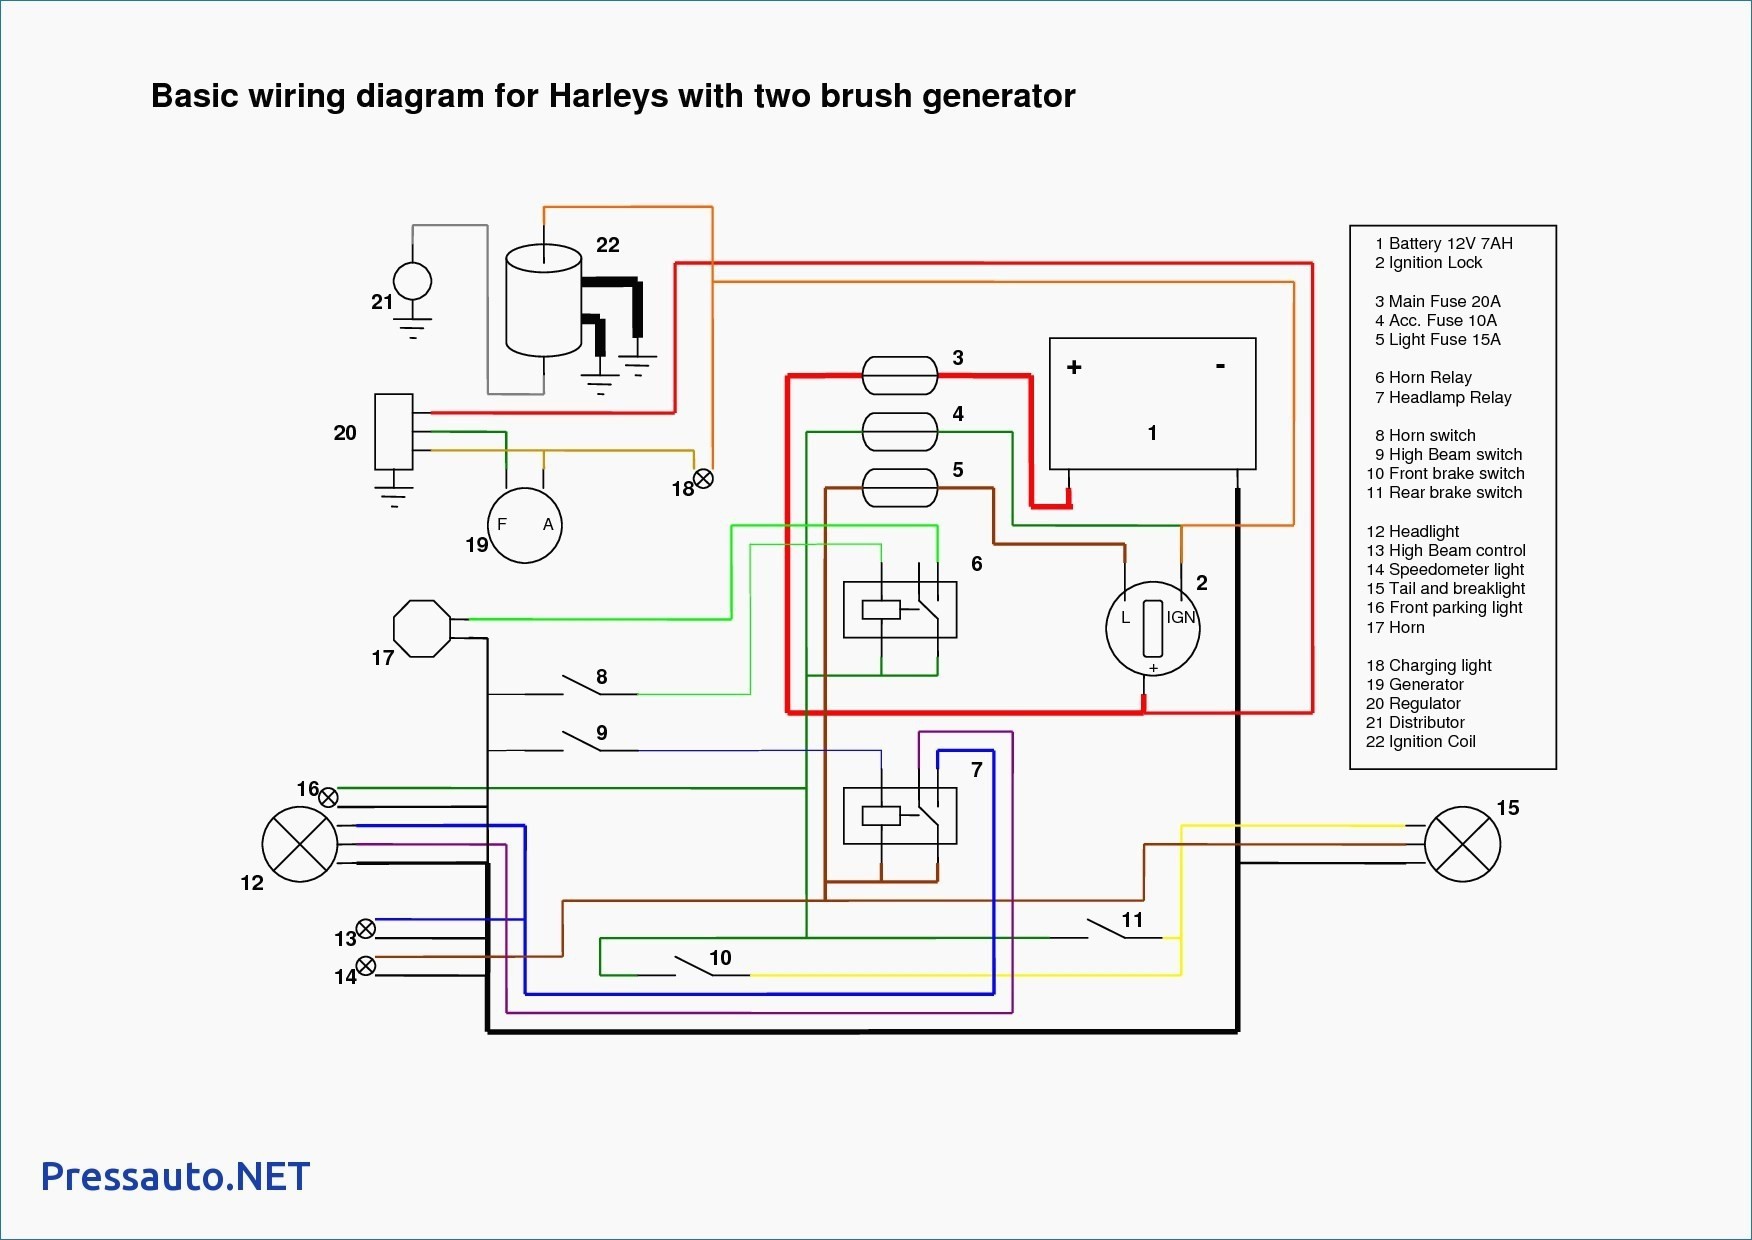 Wiring Diagram for Ignition Coil Best Basic Ignition Wiring Diagram Unique Coil Wiring Diagram Diagram